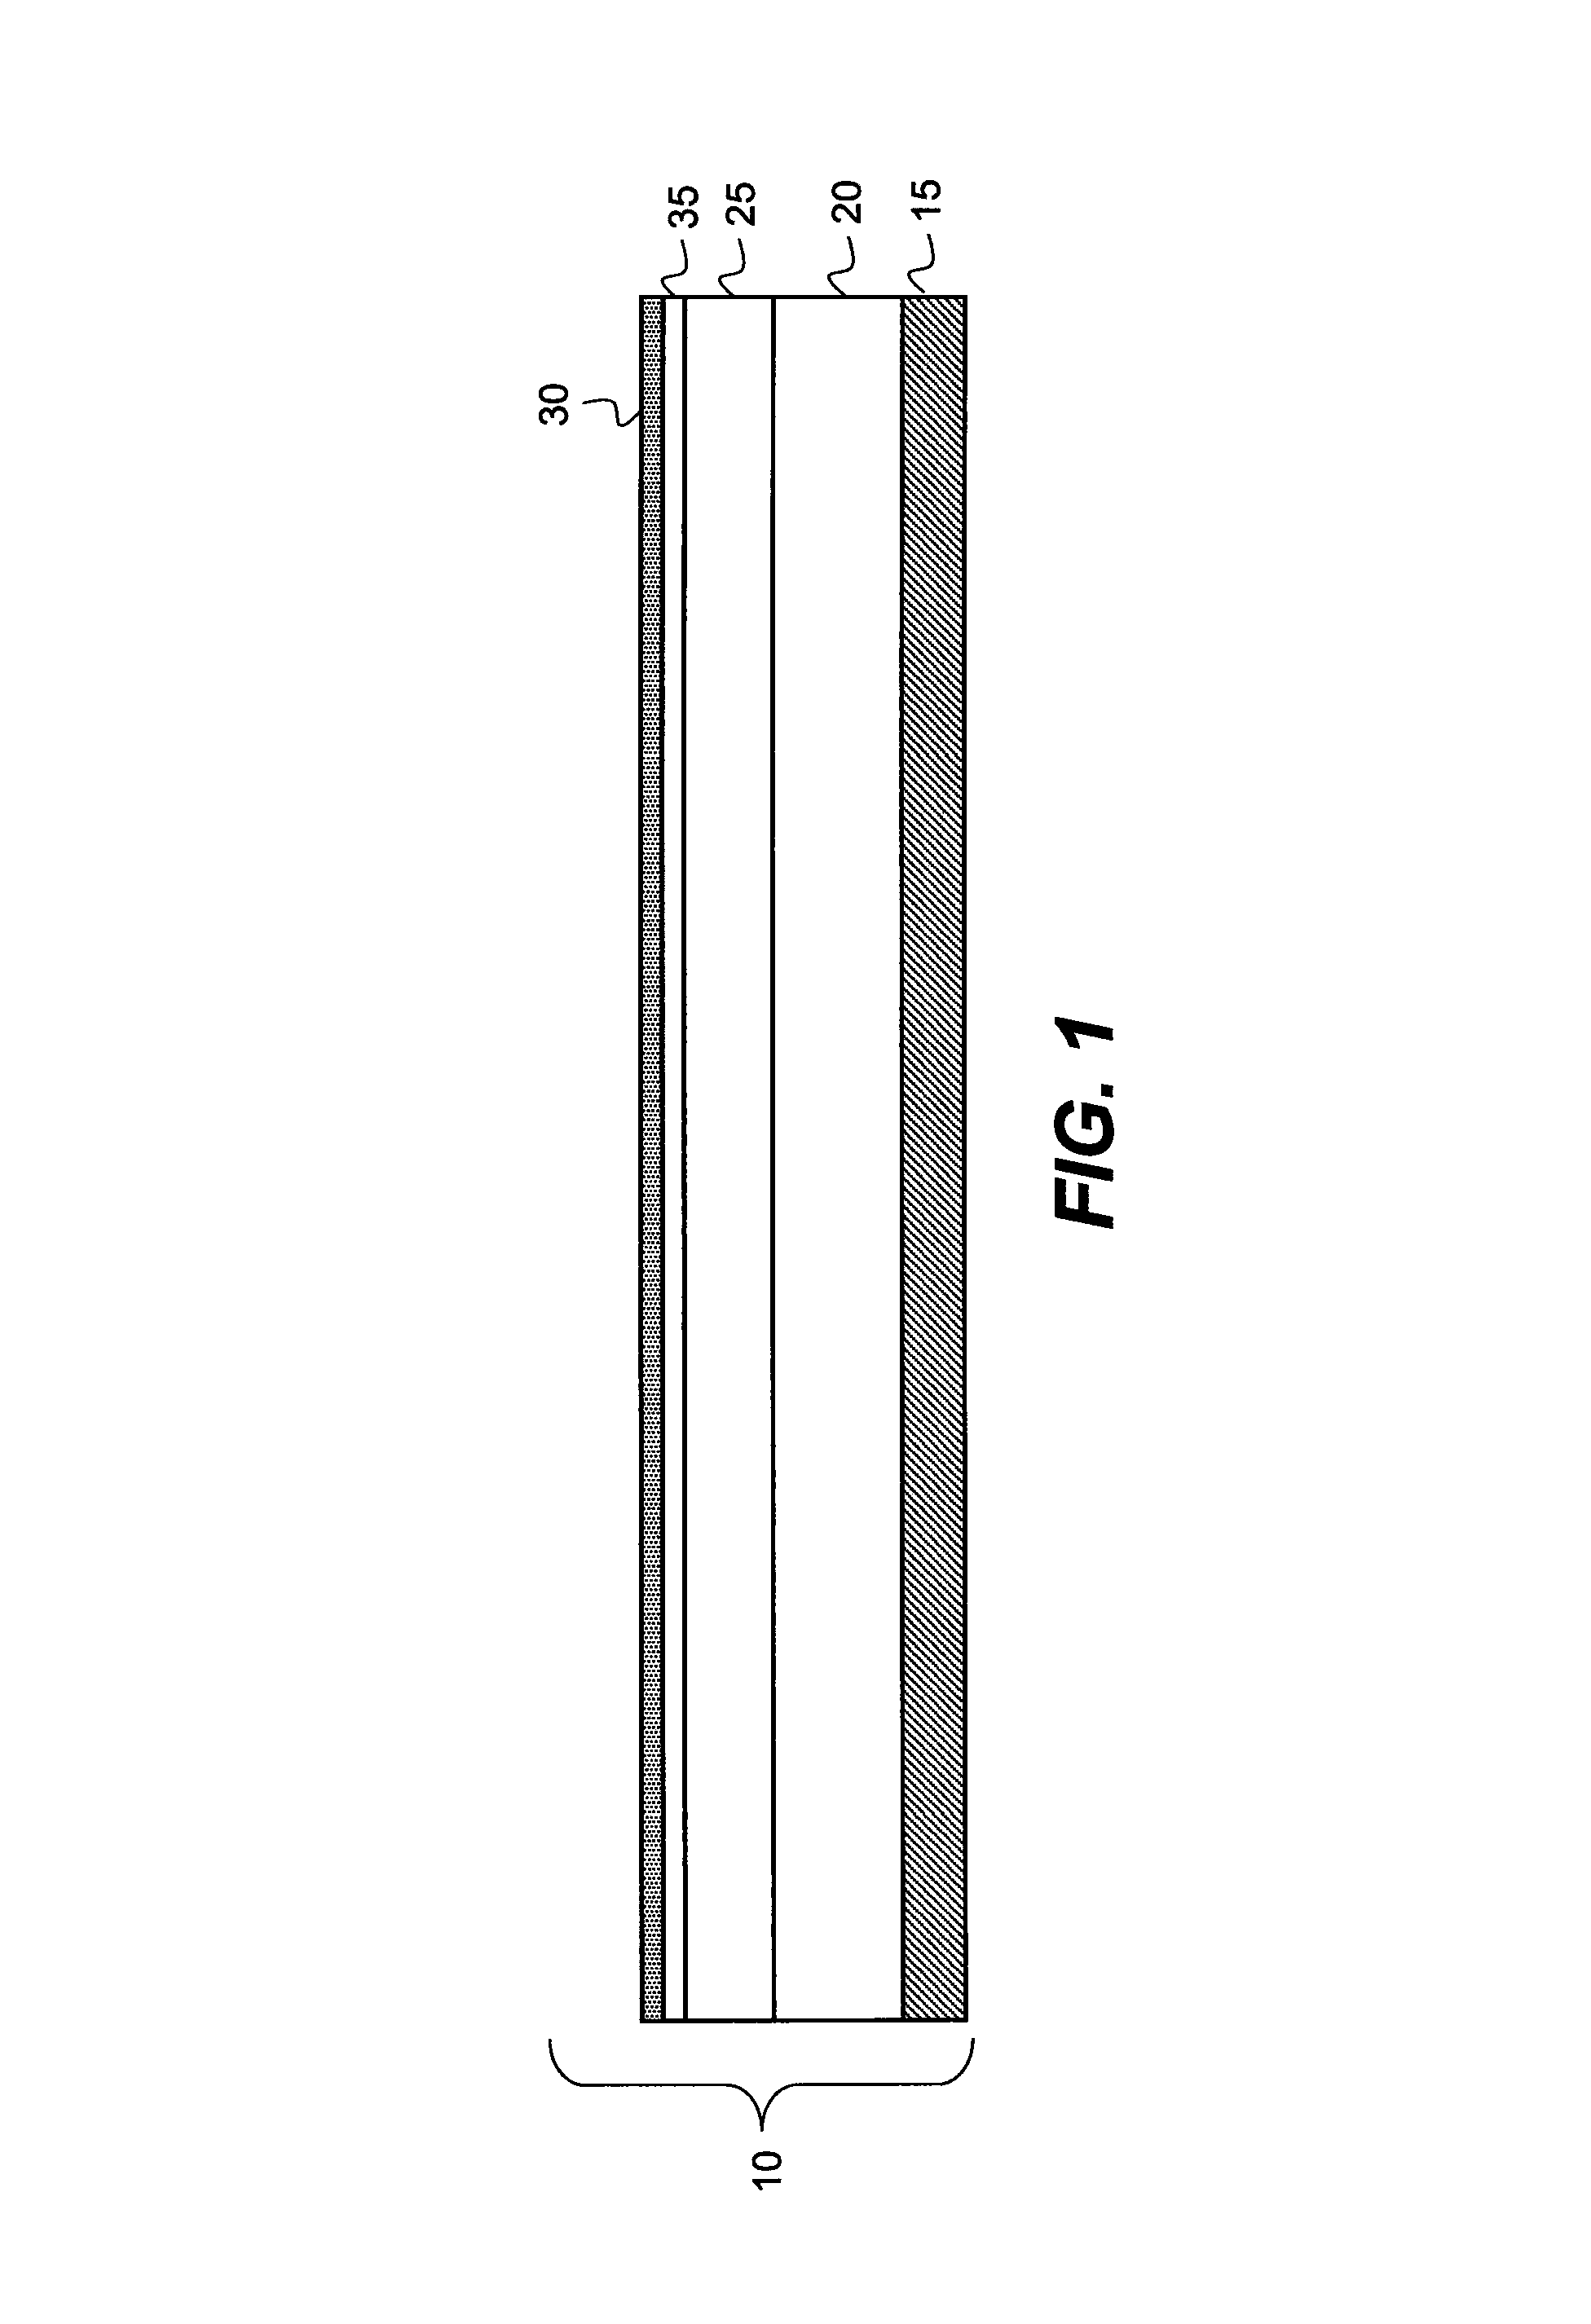 Flexographic element and method of imaging